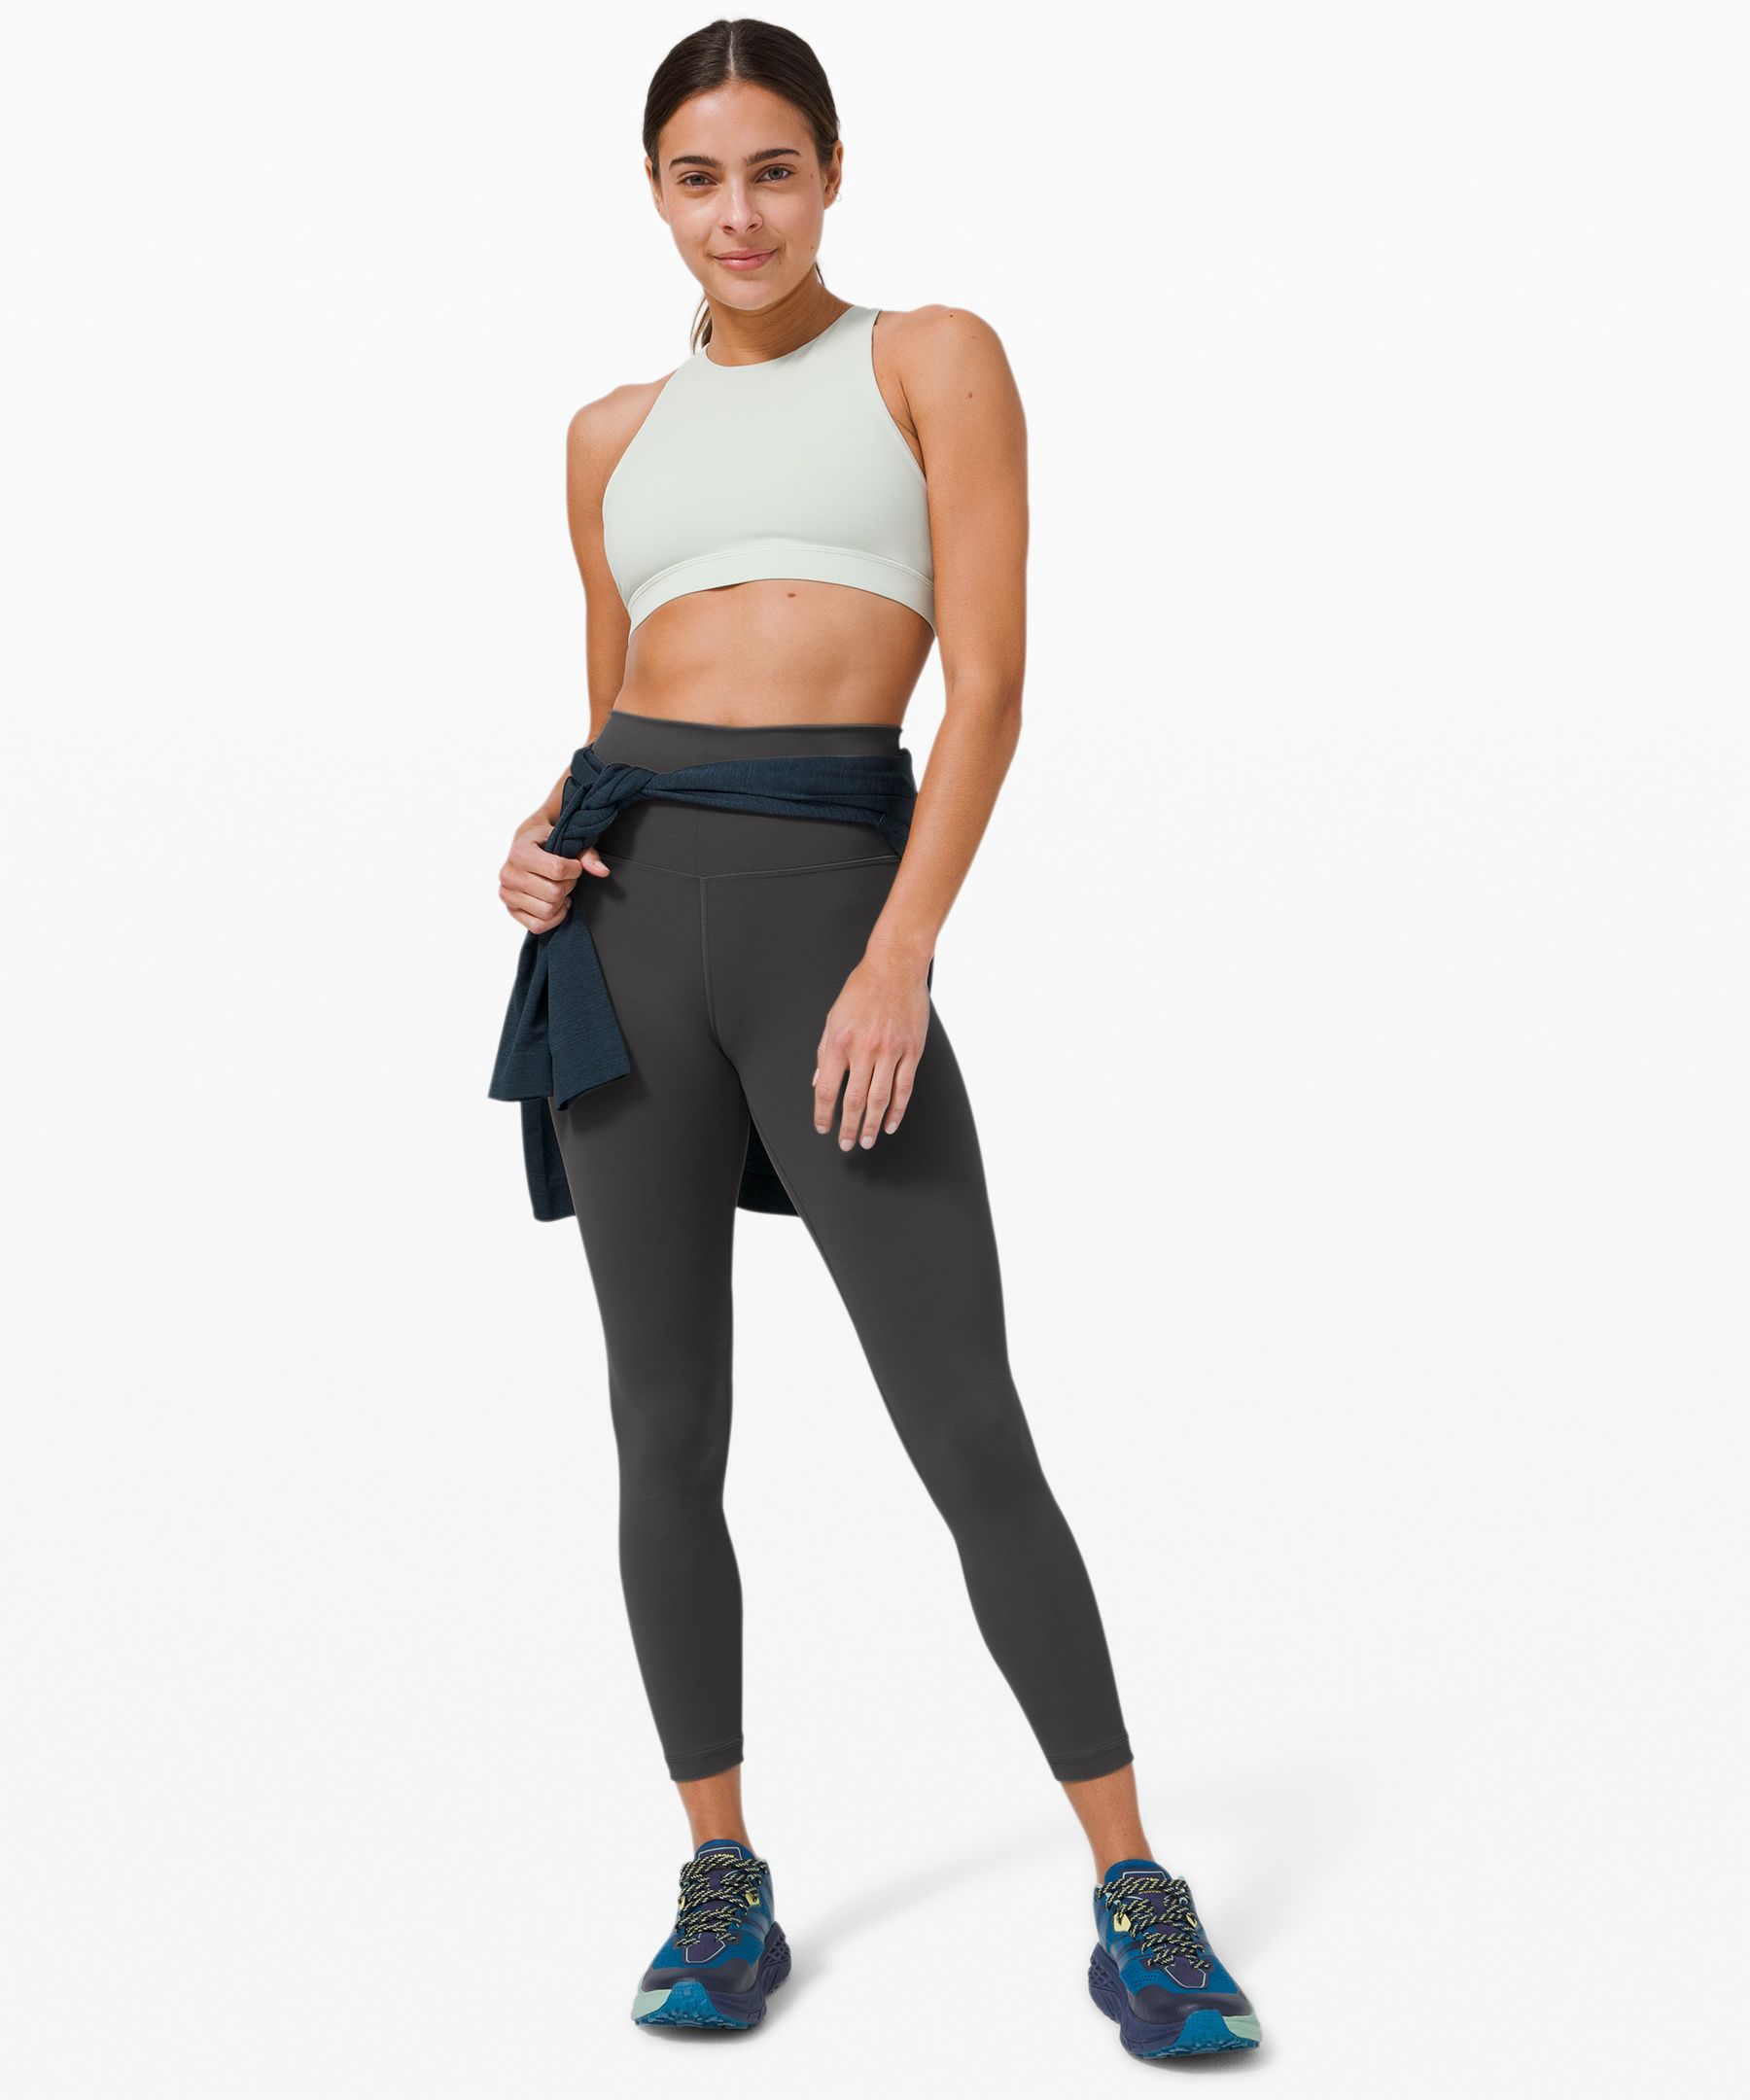 lululemon discount for athletic trainers